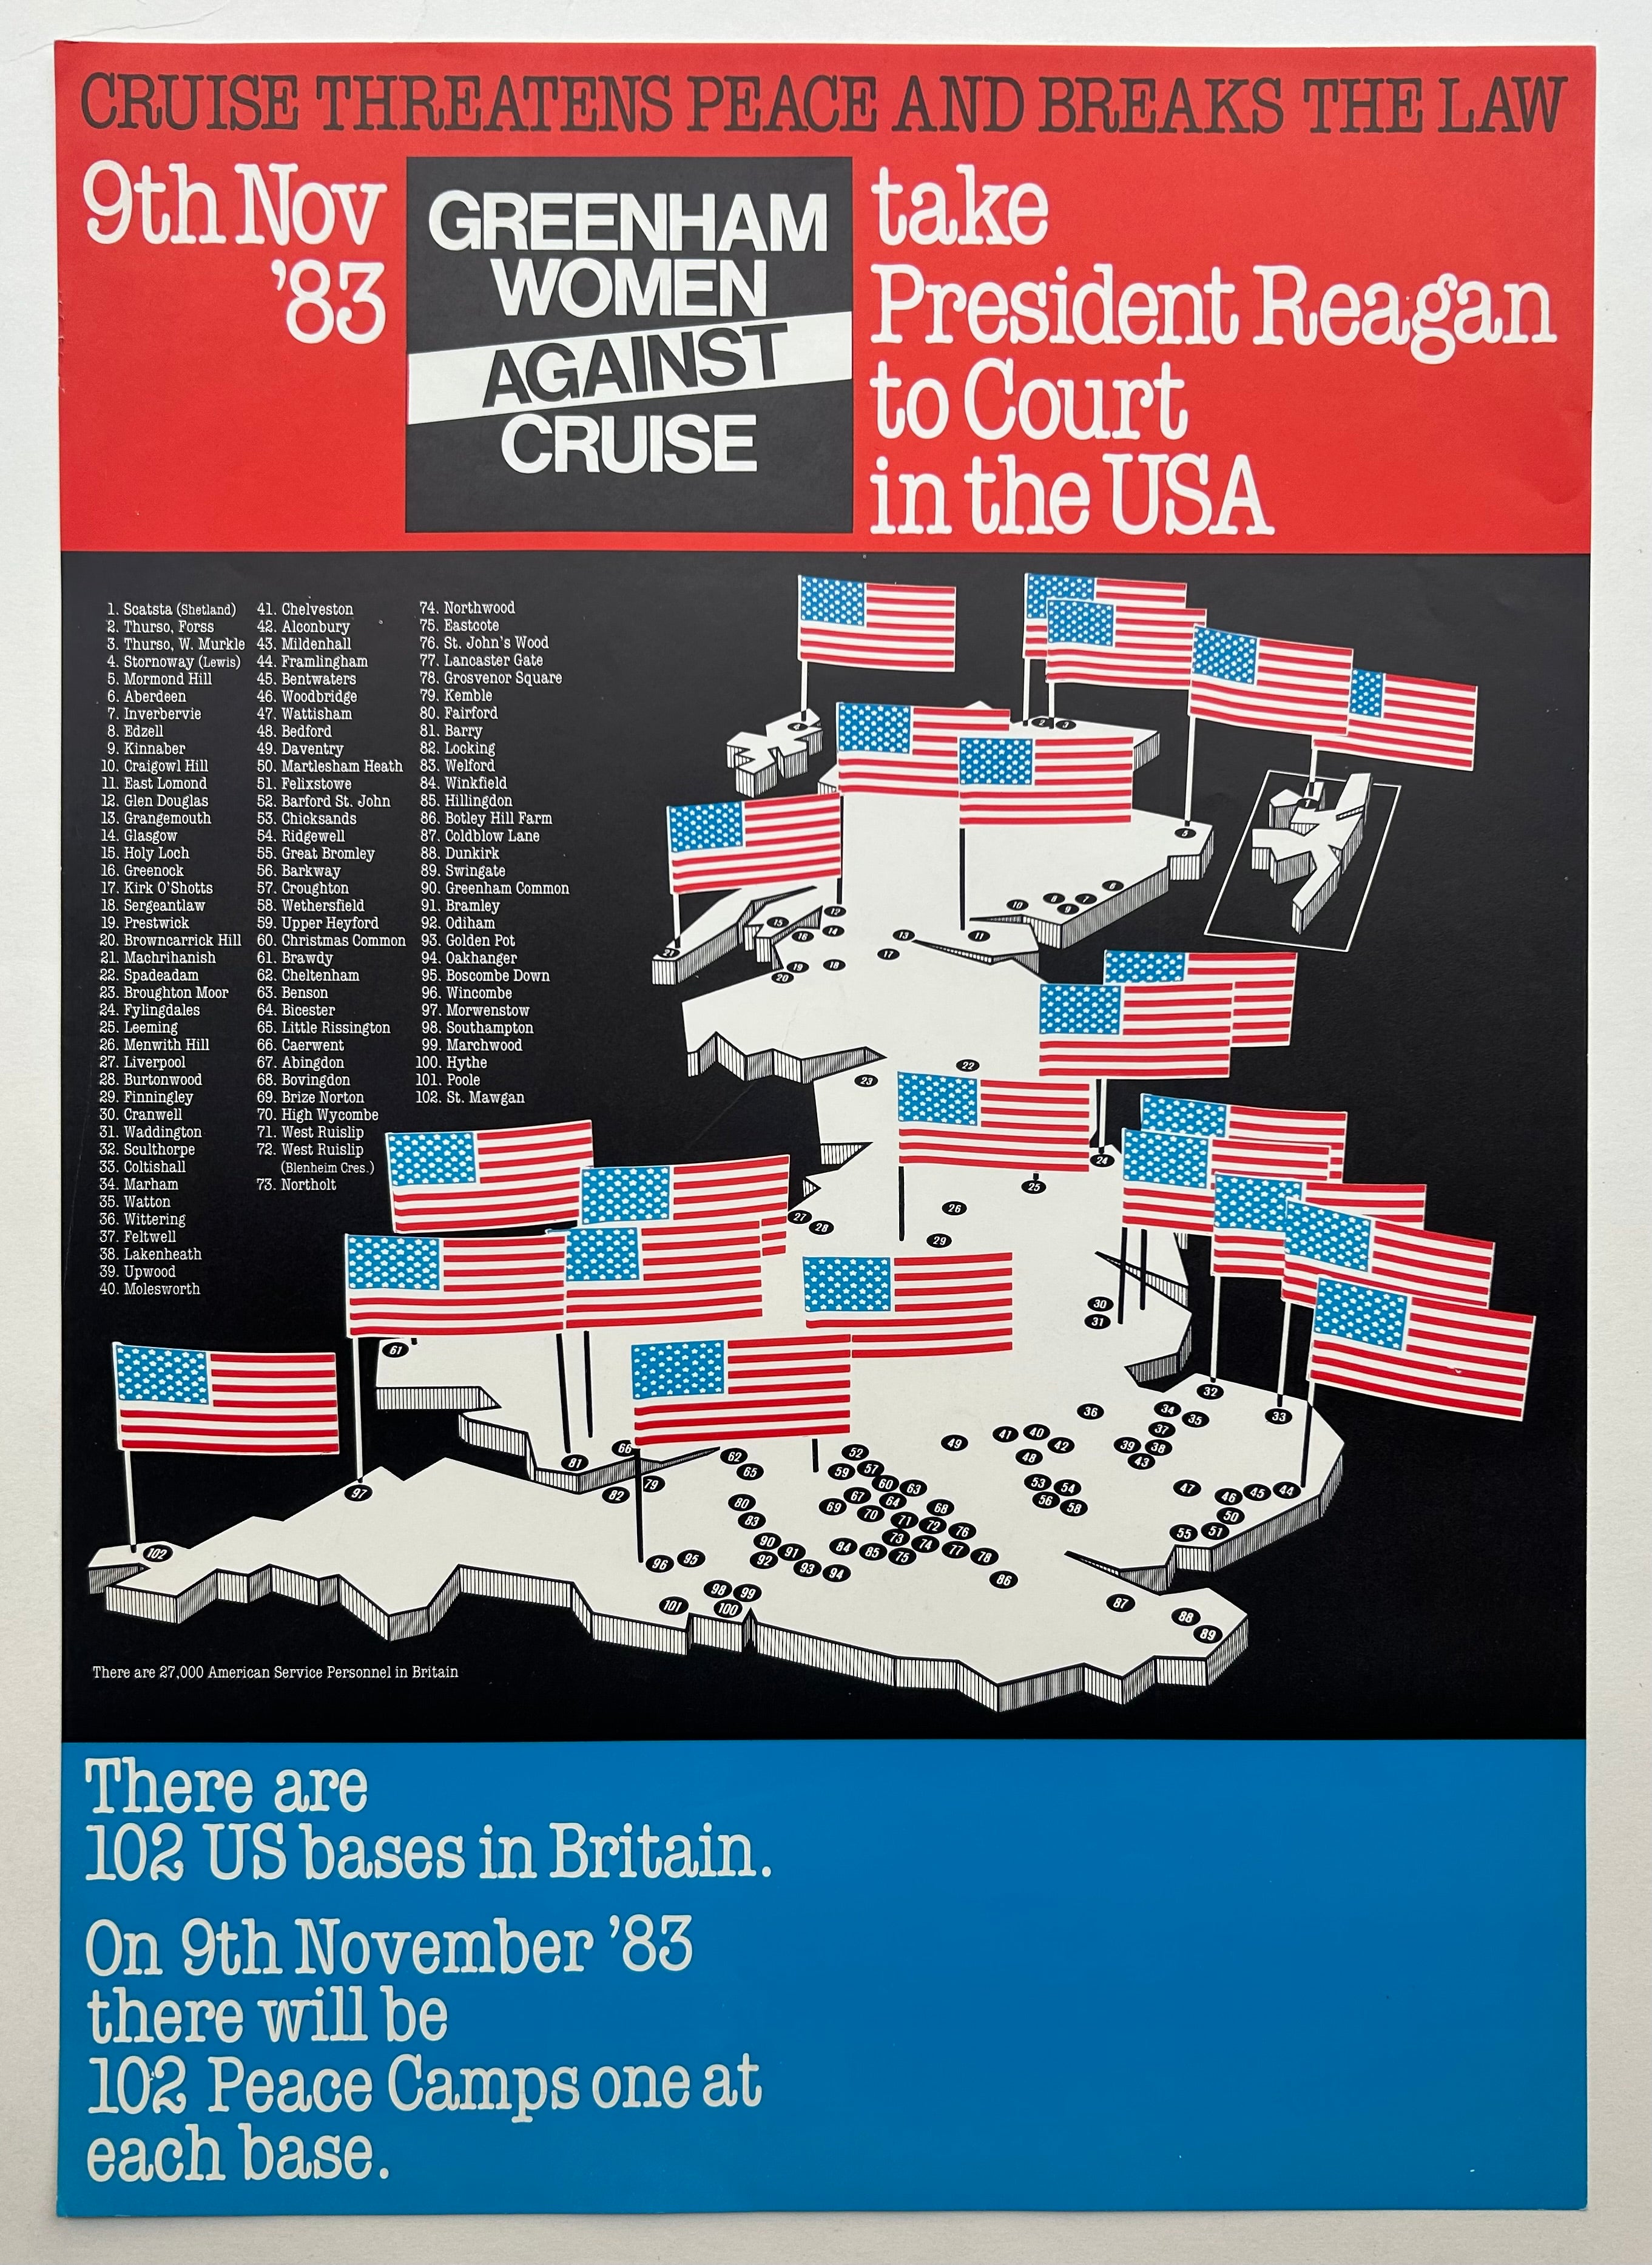 A map of Great Britain is shown with American flags placed on many of the US military bases. The bases are all written out in white text. THe poster is split into colorful blocks of red, black, and blue. 